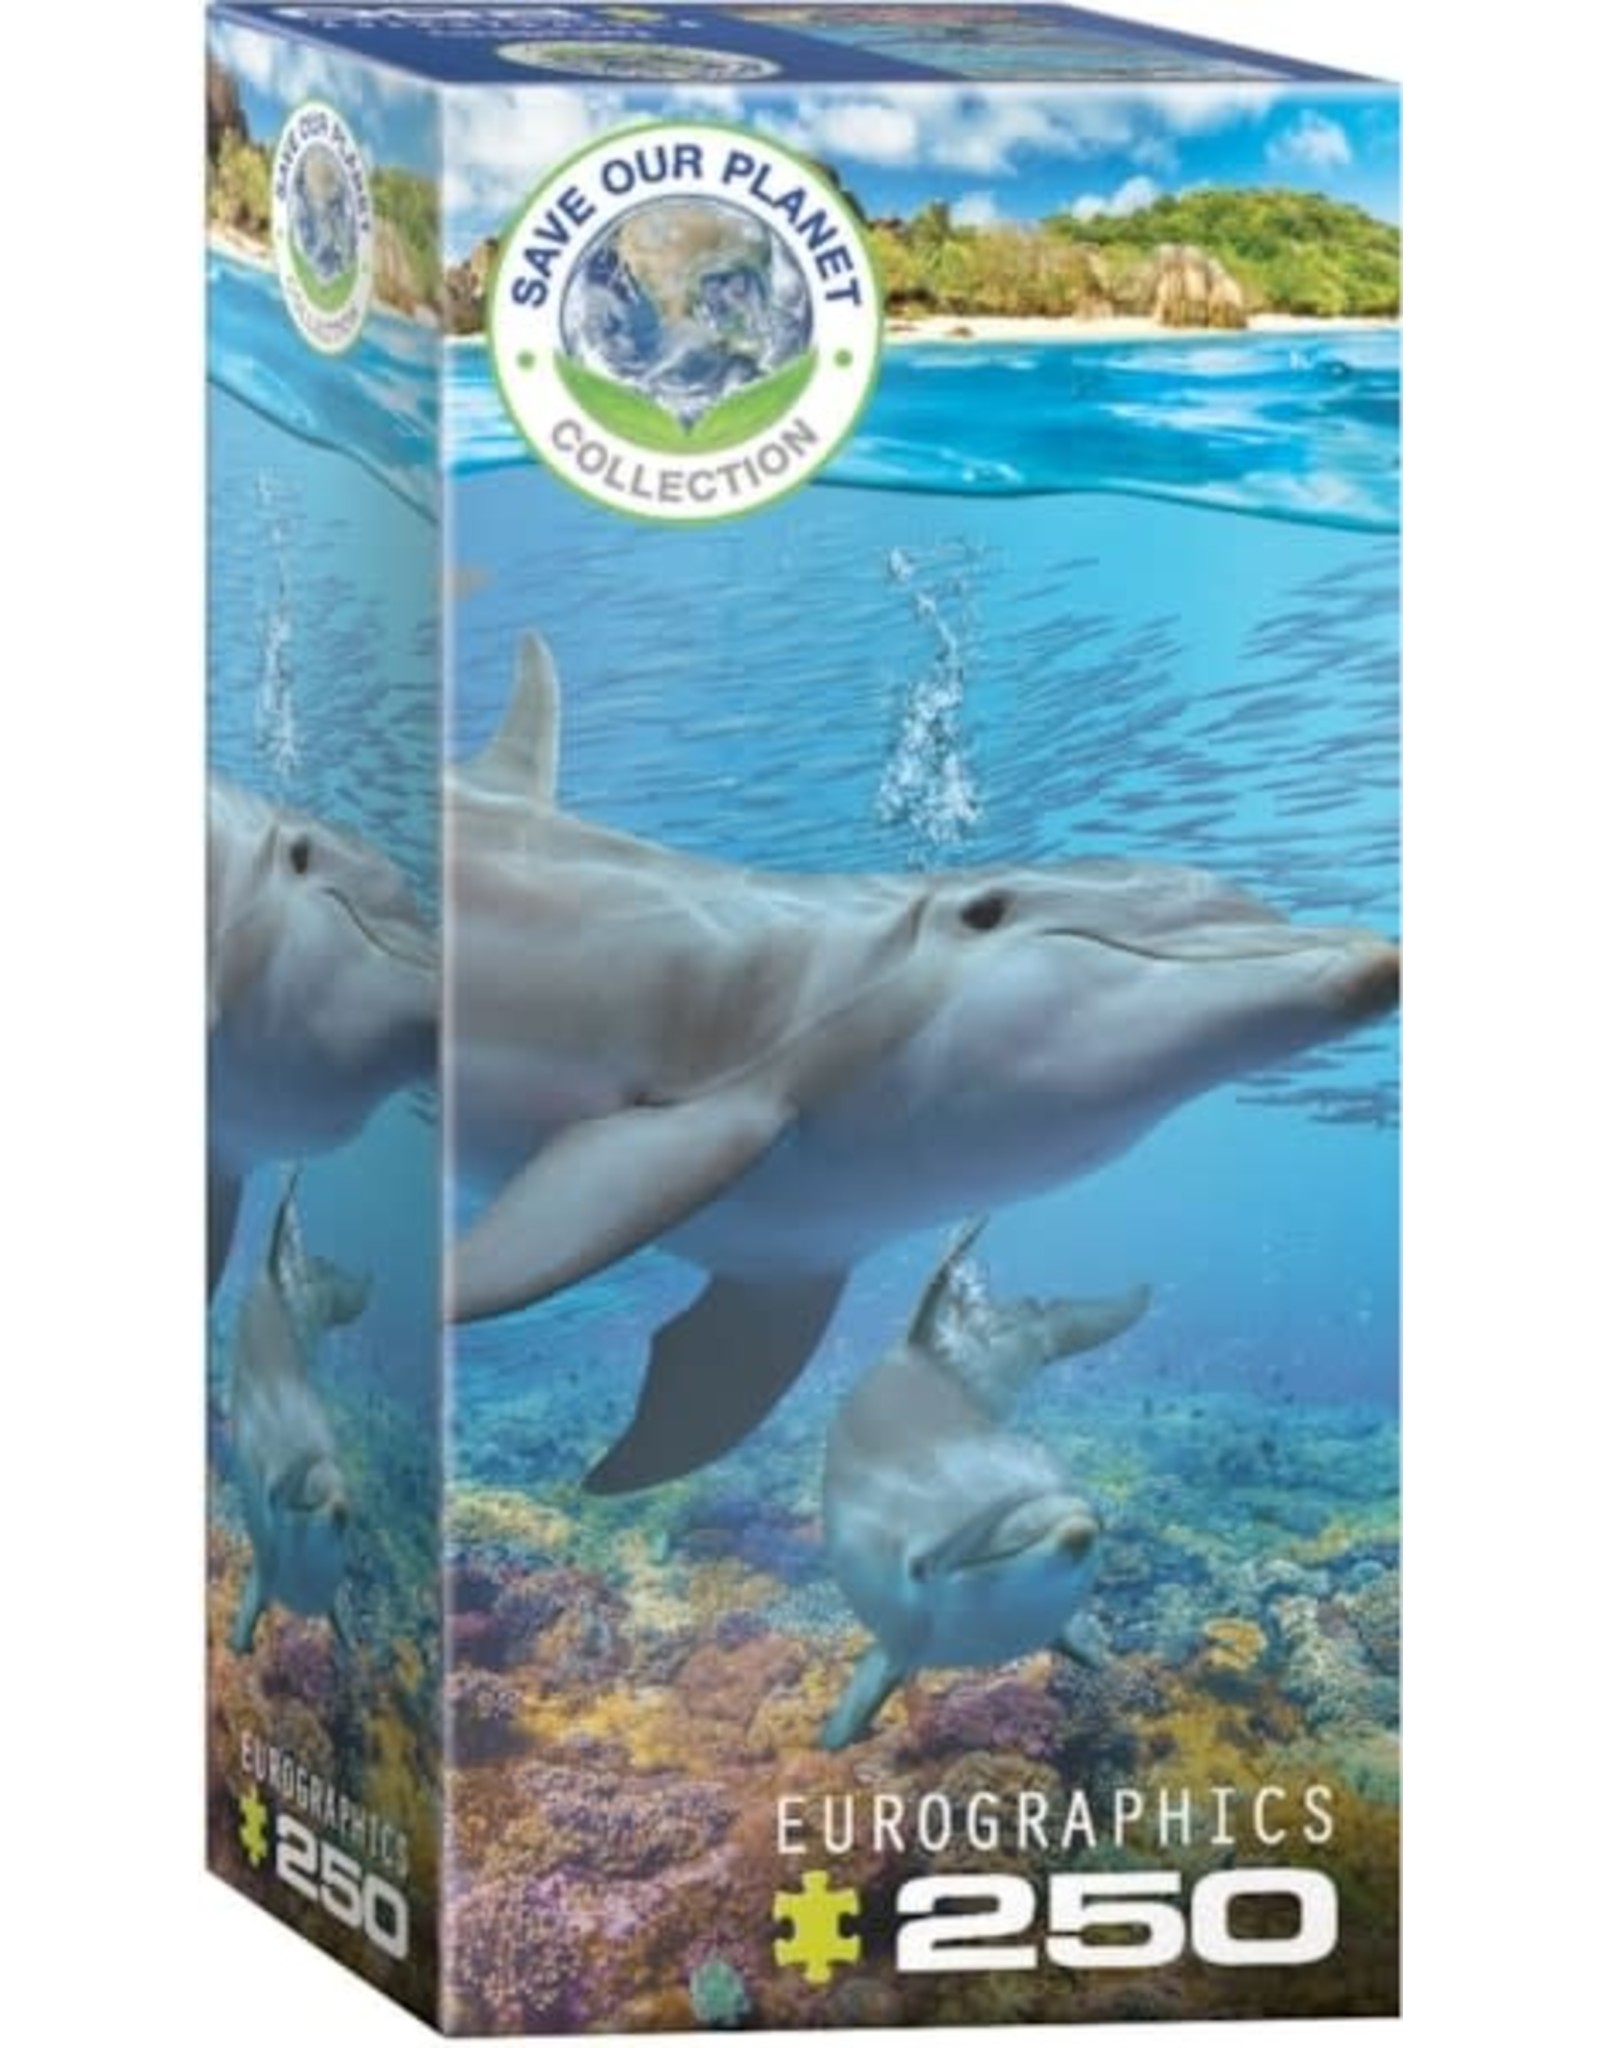 Eurographics Dolphins 250pc